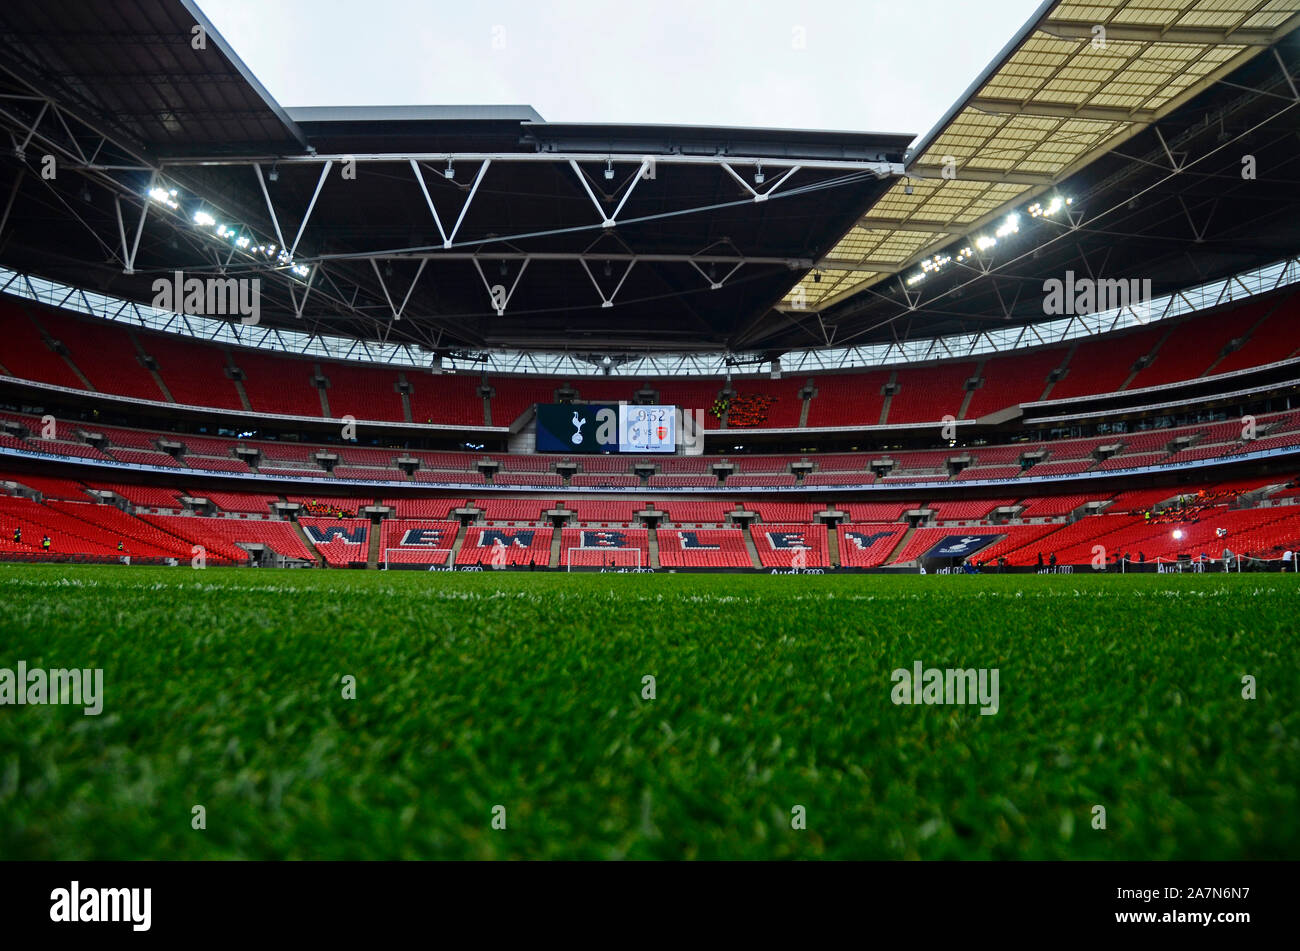 LONDON, ENGLAND - MARCH 2, 2019: General view of the venue prior to the 2018/19 Premier League game between Tottenham Hotspur and Arsenal FC at Wembley Stadium. Stock Photo